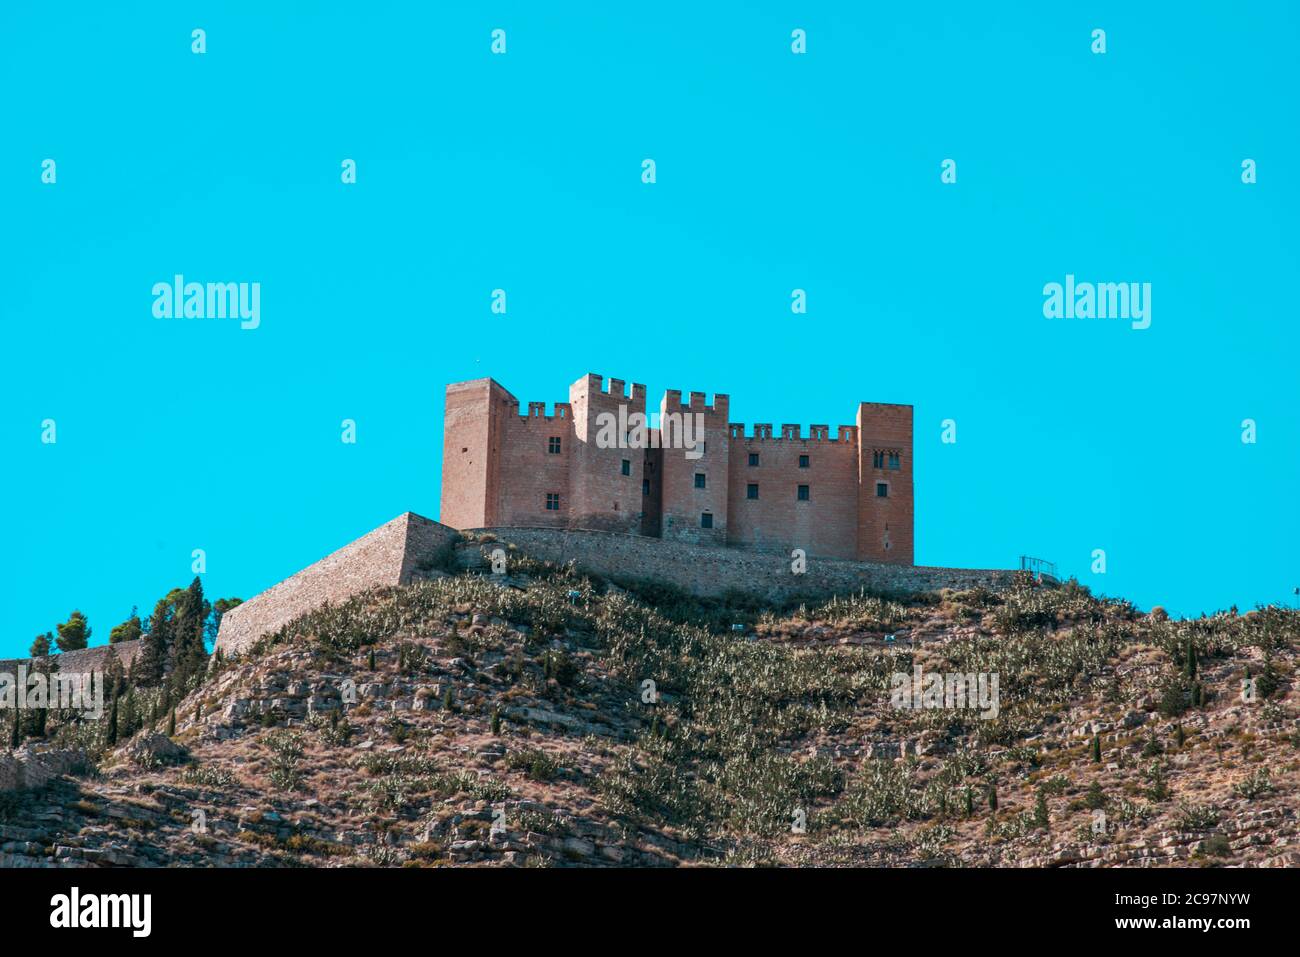 a view of the old Mequinenza castle, built on the top of a hill, in Mequinenza, Spain Stock Photo